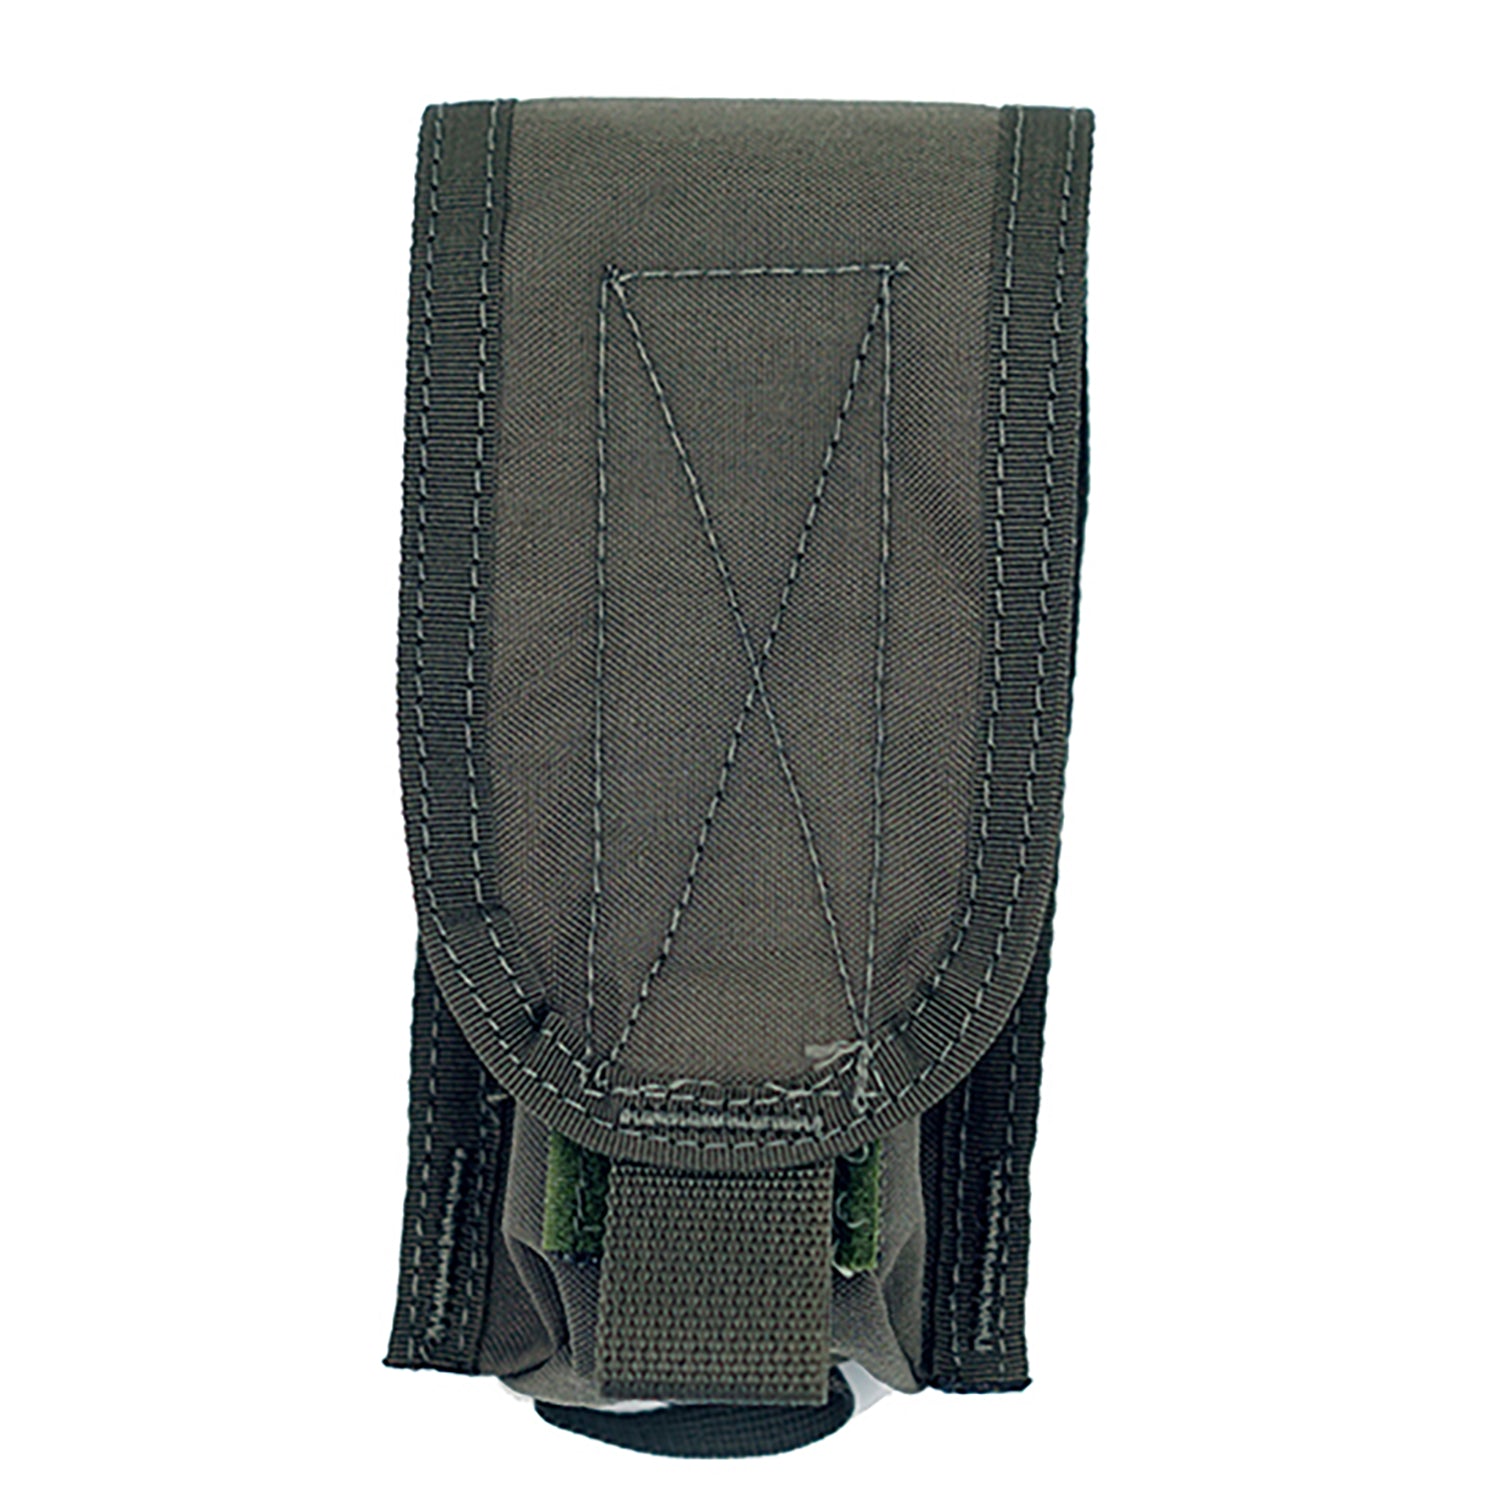 Pre MSA Paraclete style Smoke green single flash bang pouch with round & square flap - Shekkin Gears